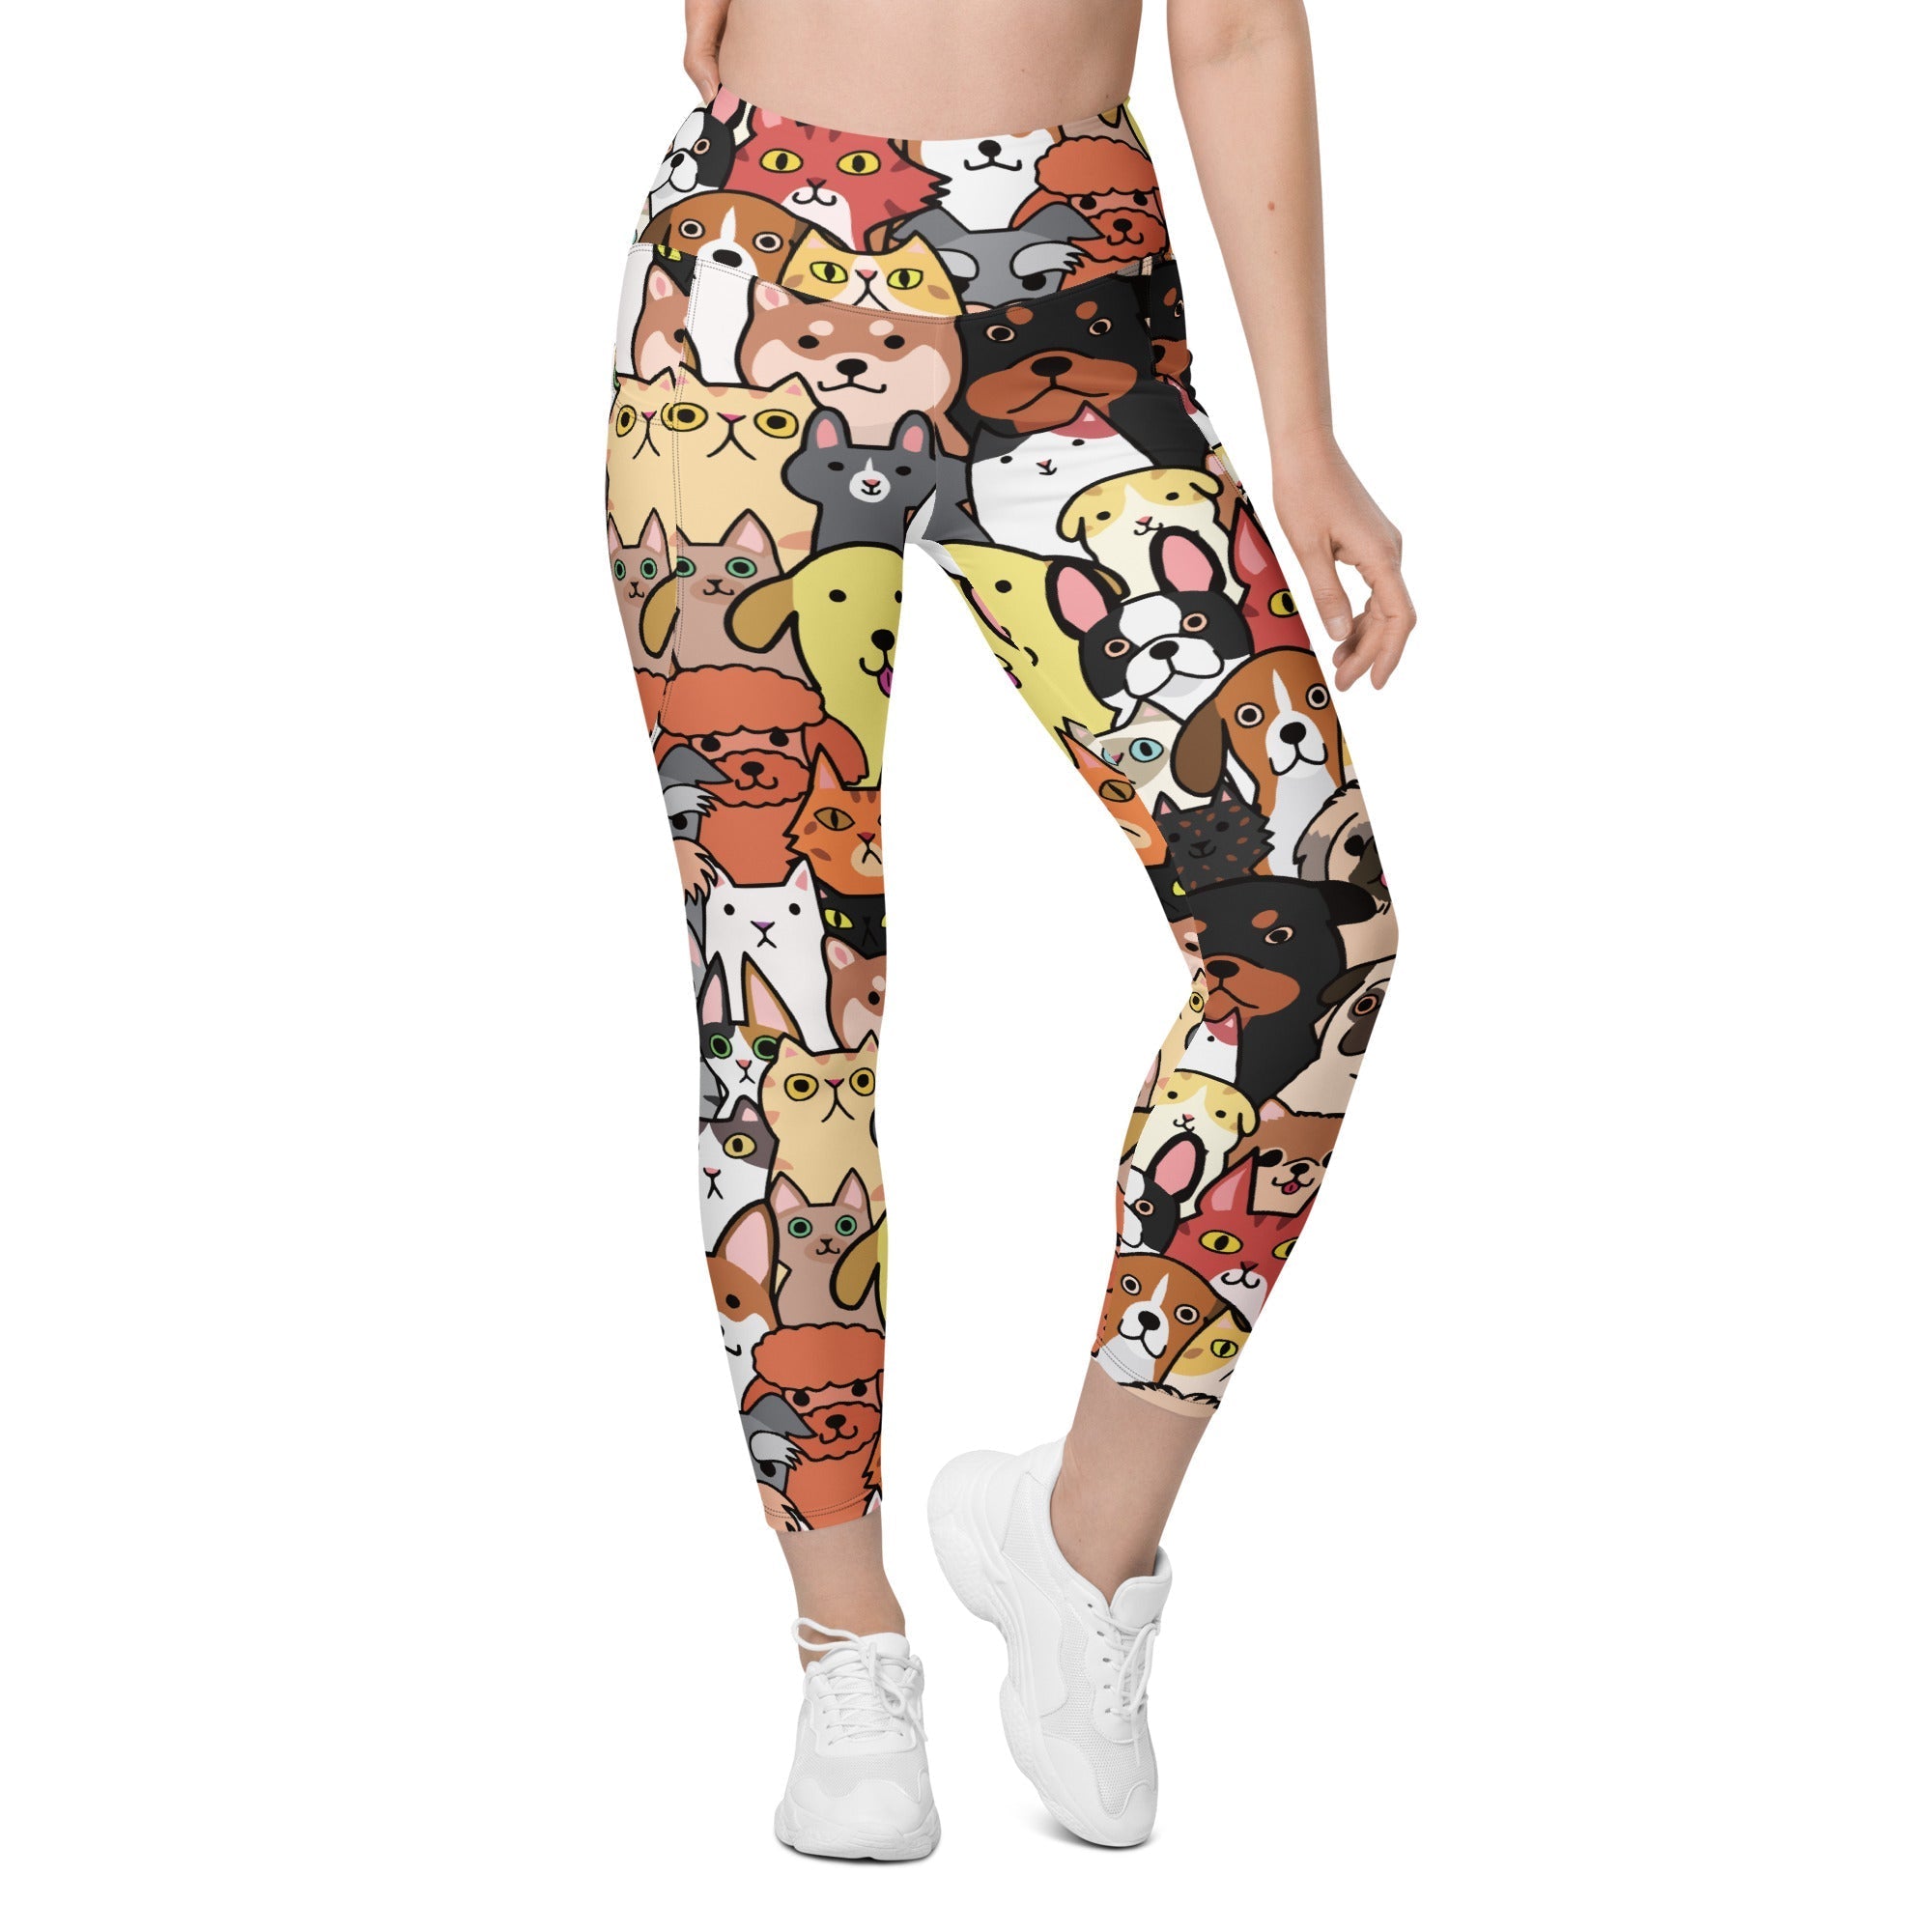 Cuteness Overload Leggings With Pockets